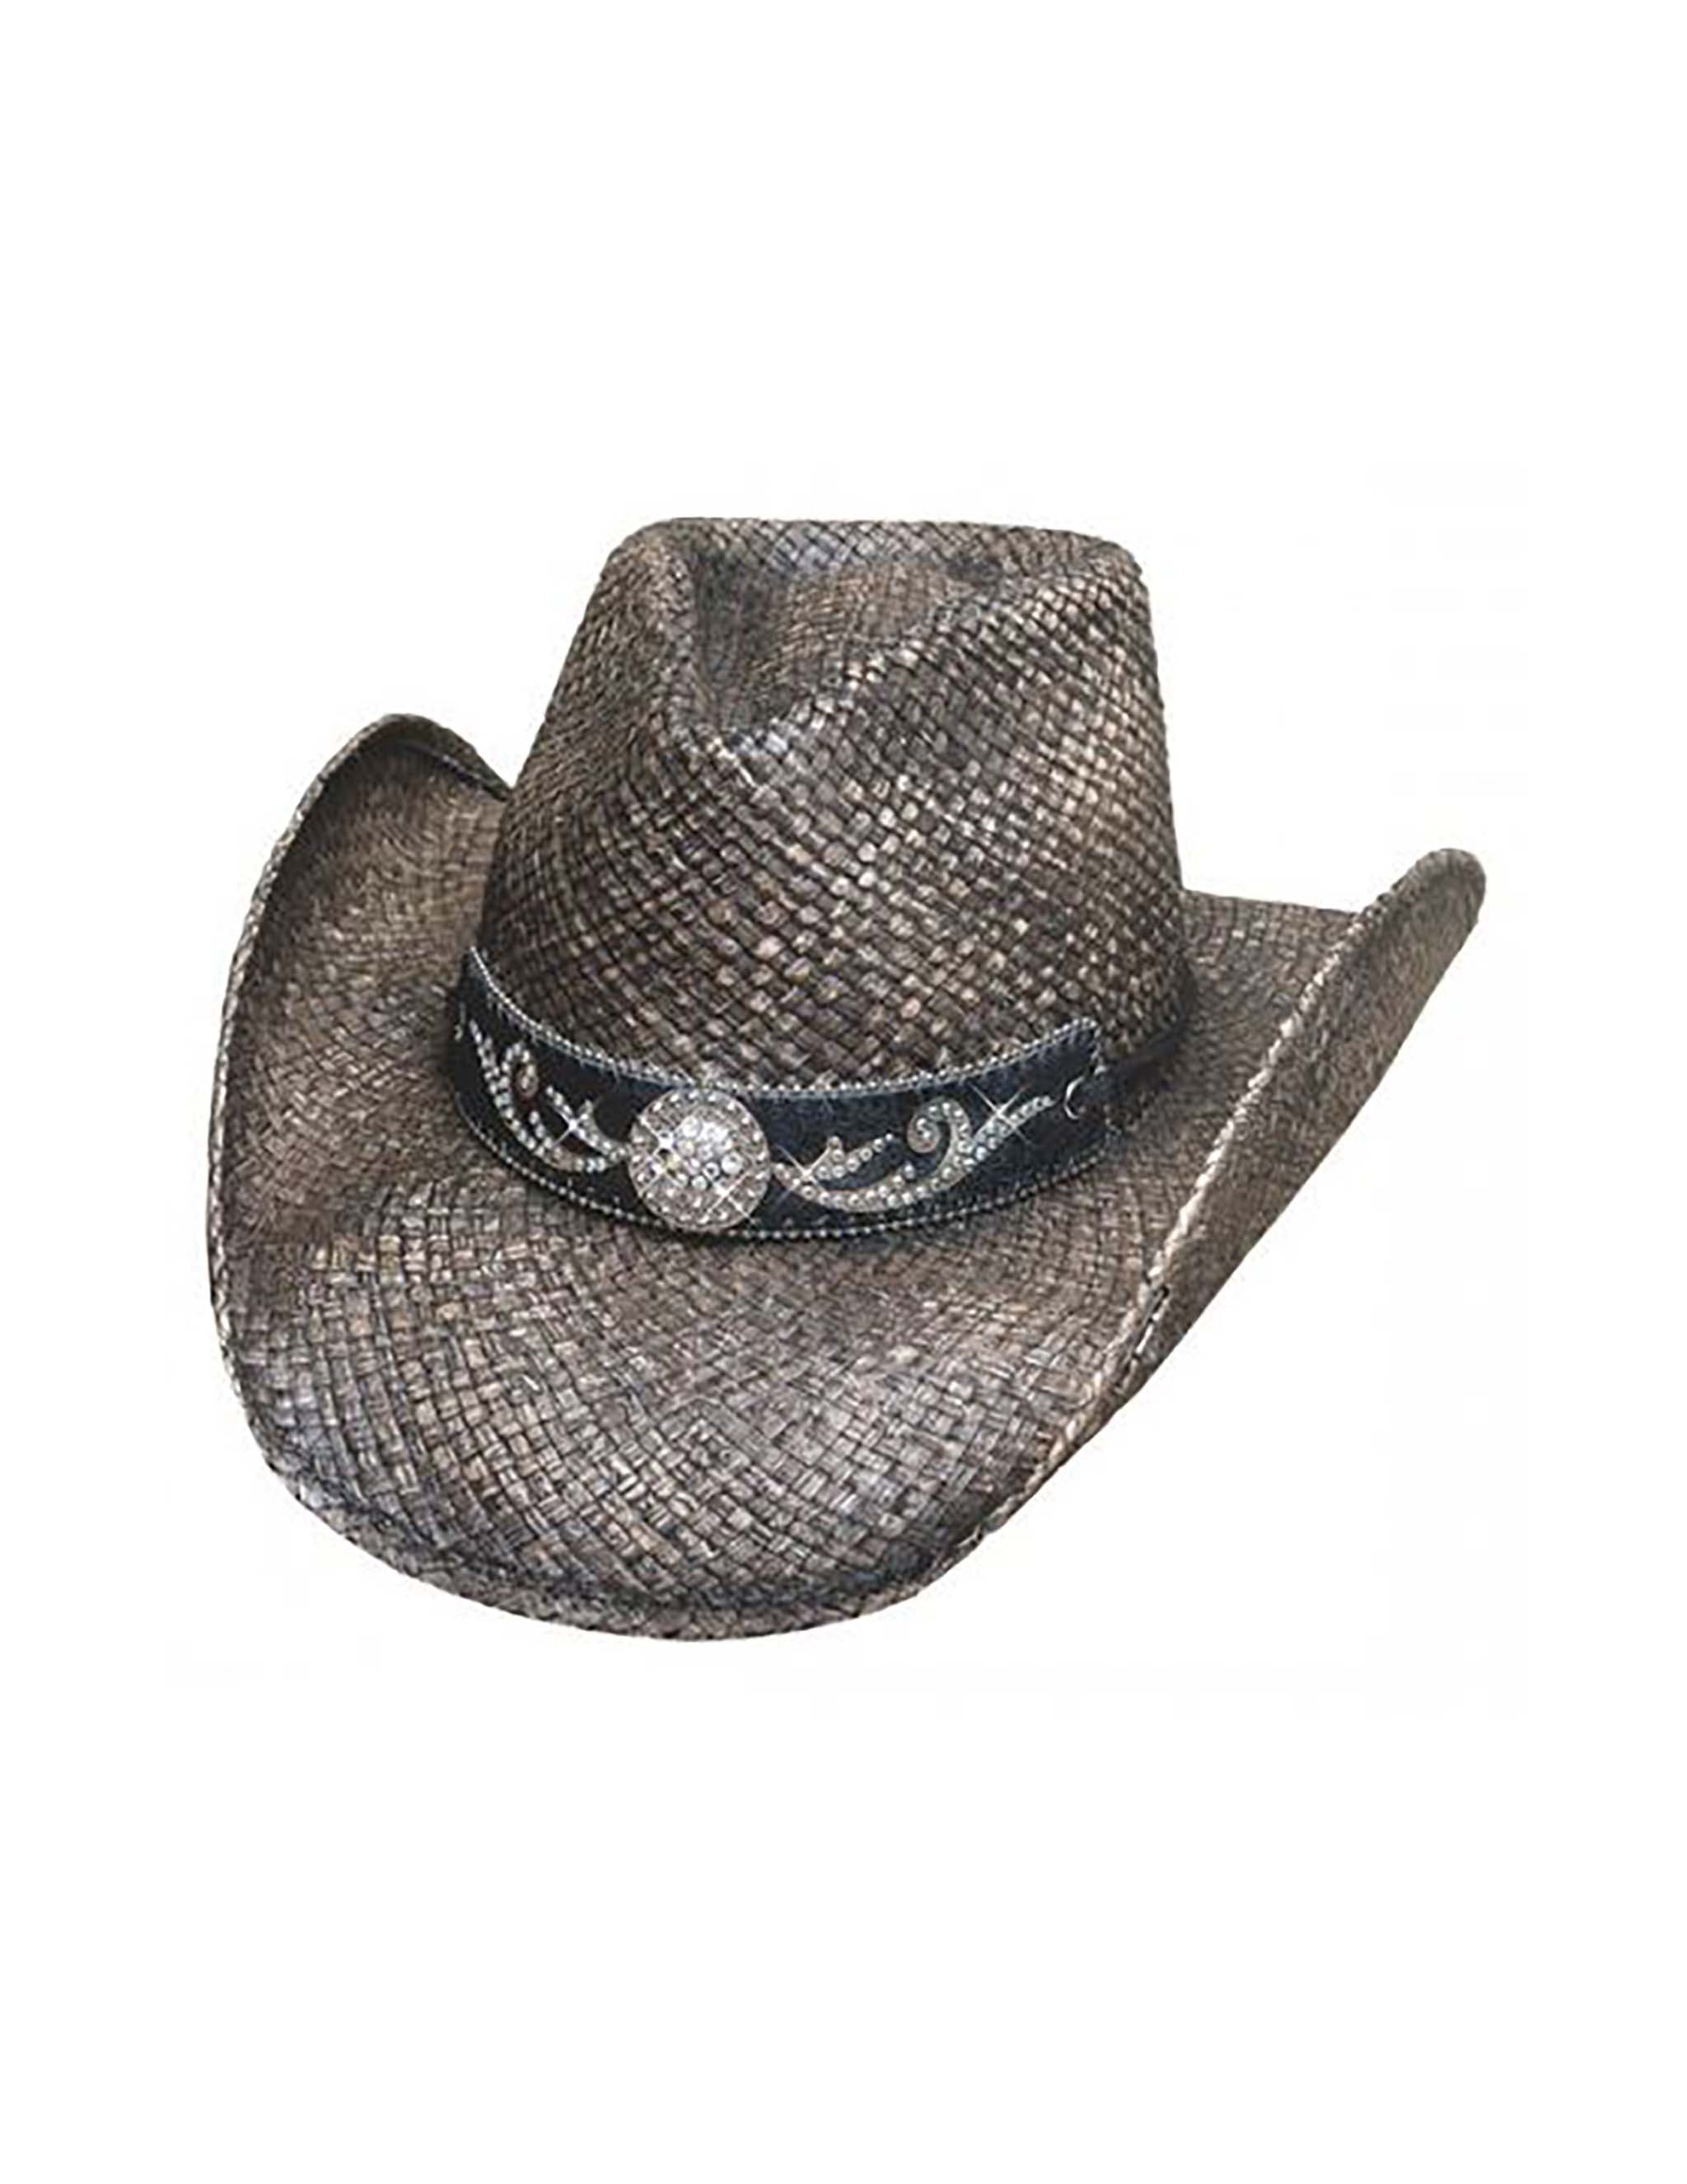 Tennessee River Cowboy Hat